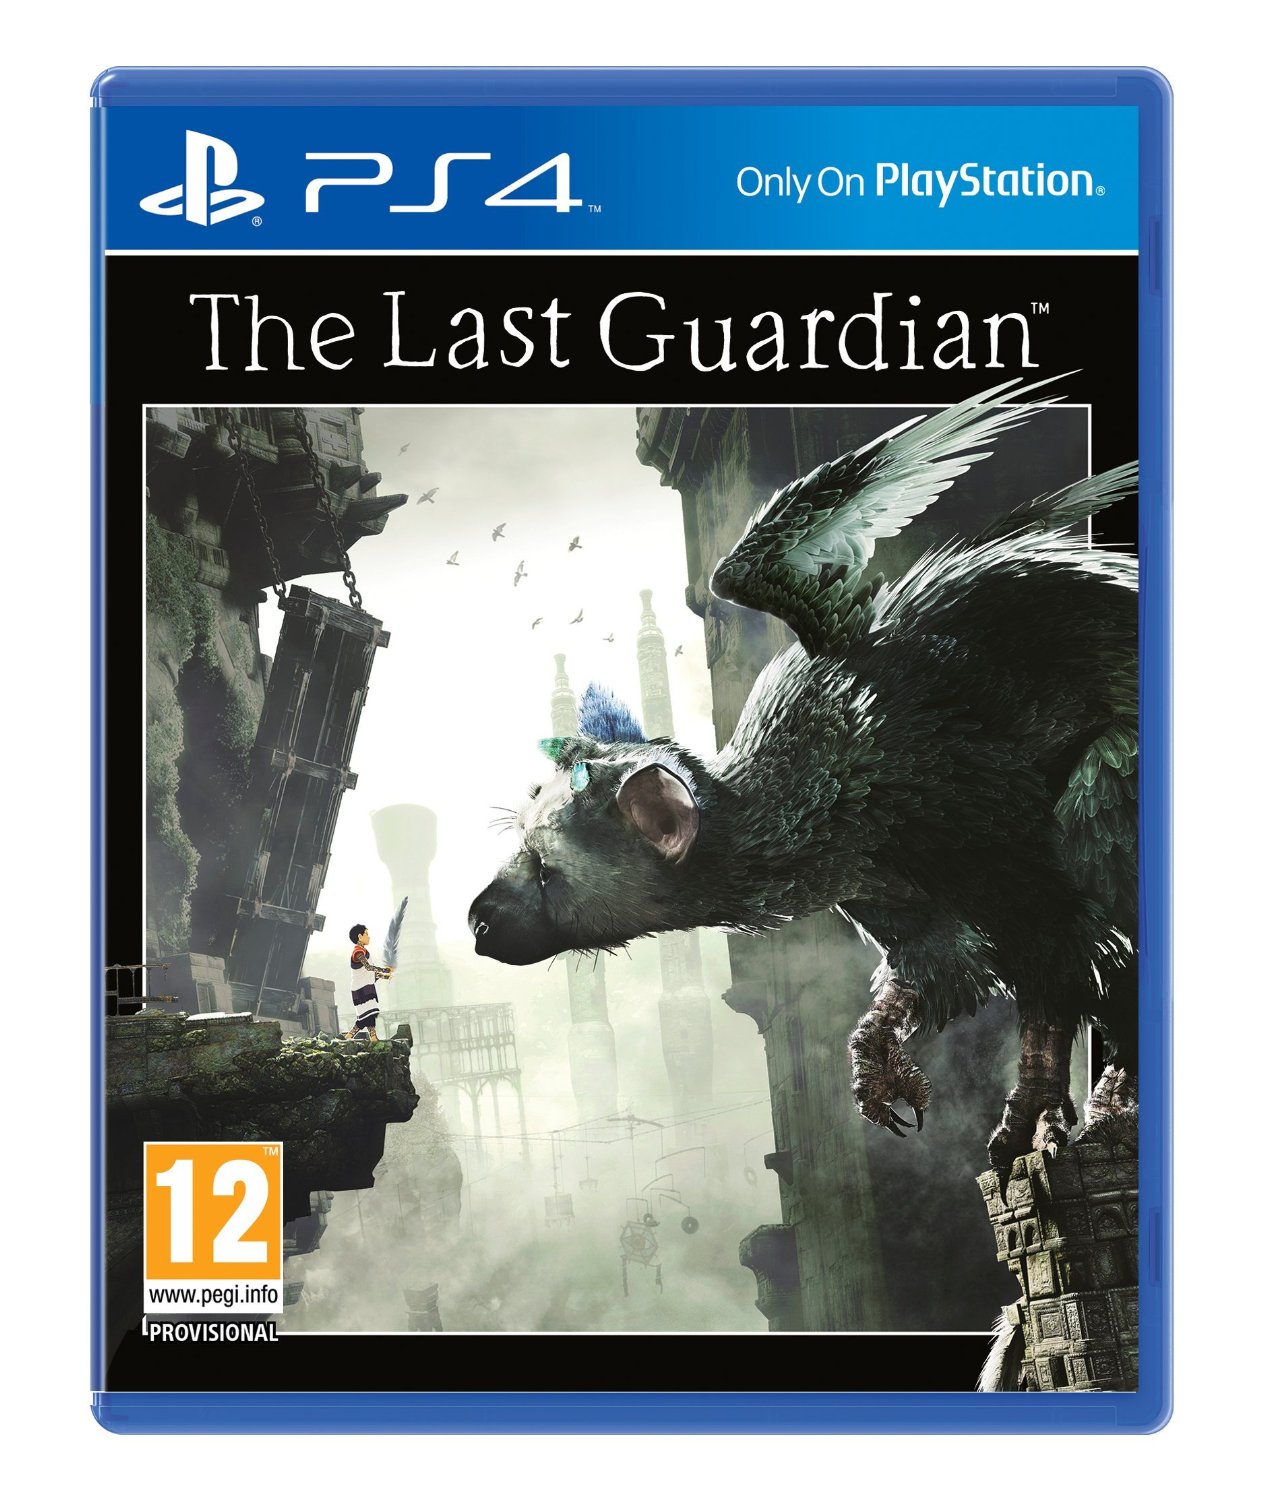 the last guardian xbox one release